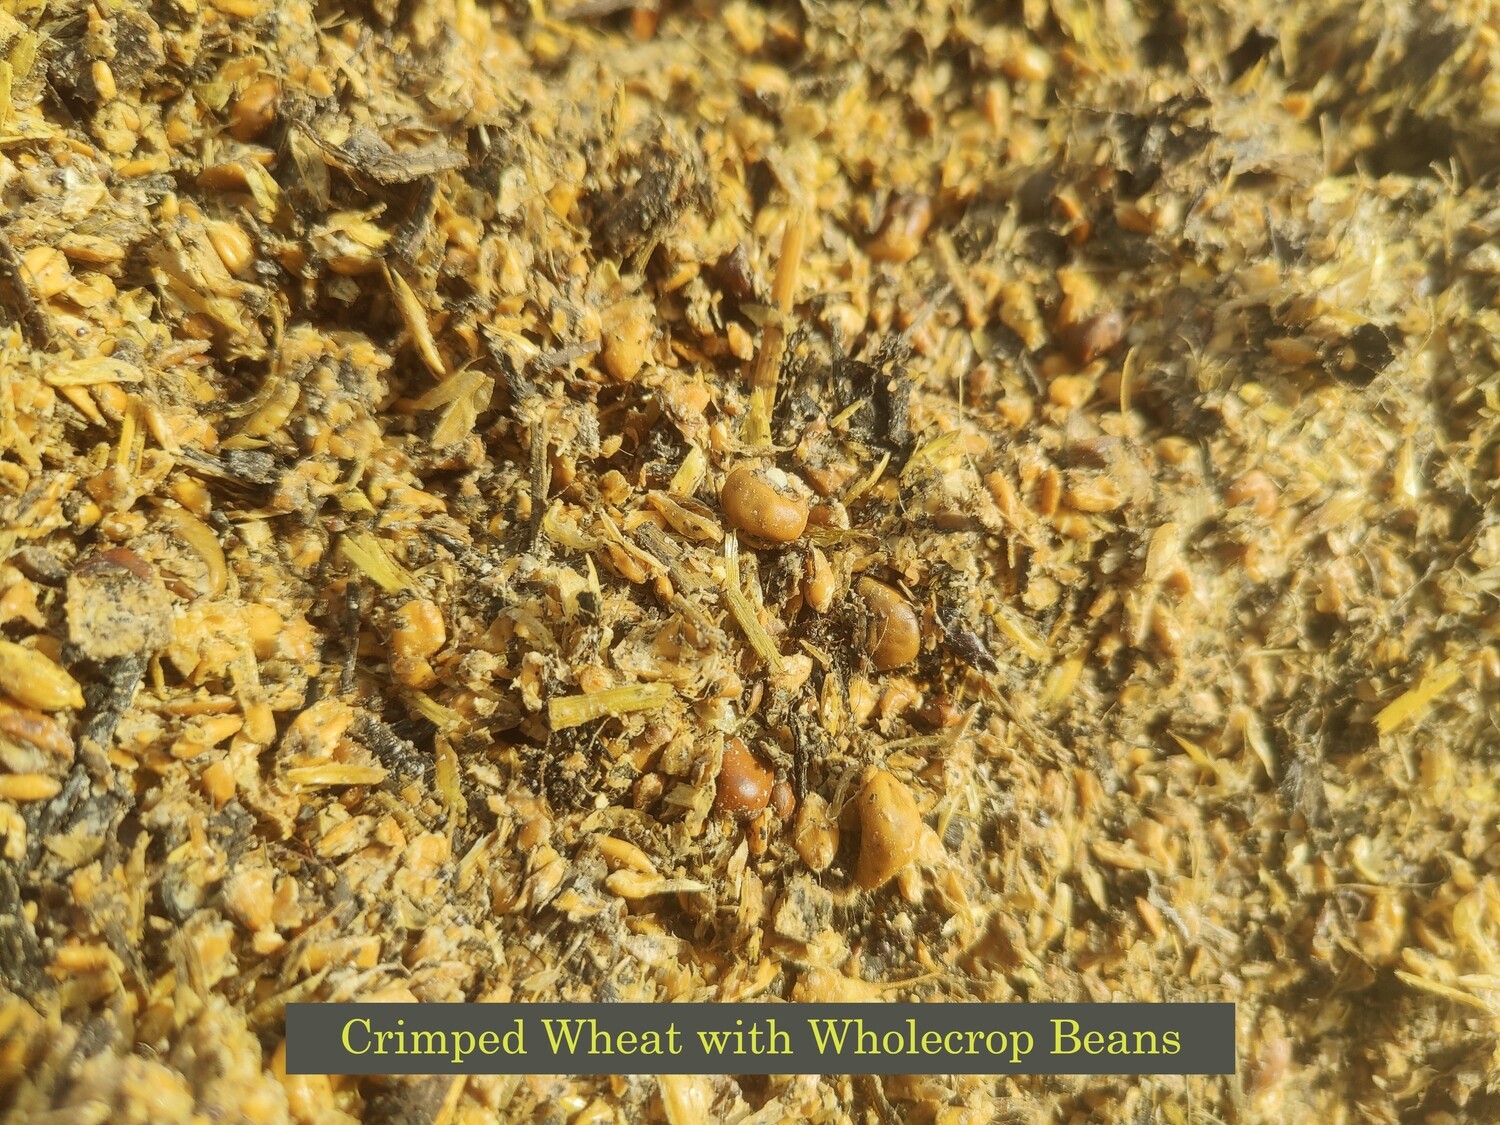 Crimped Wheat with Wholecrop Beans